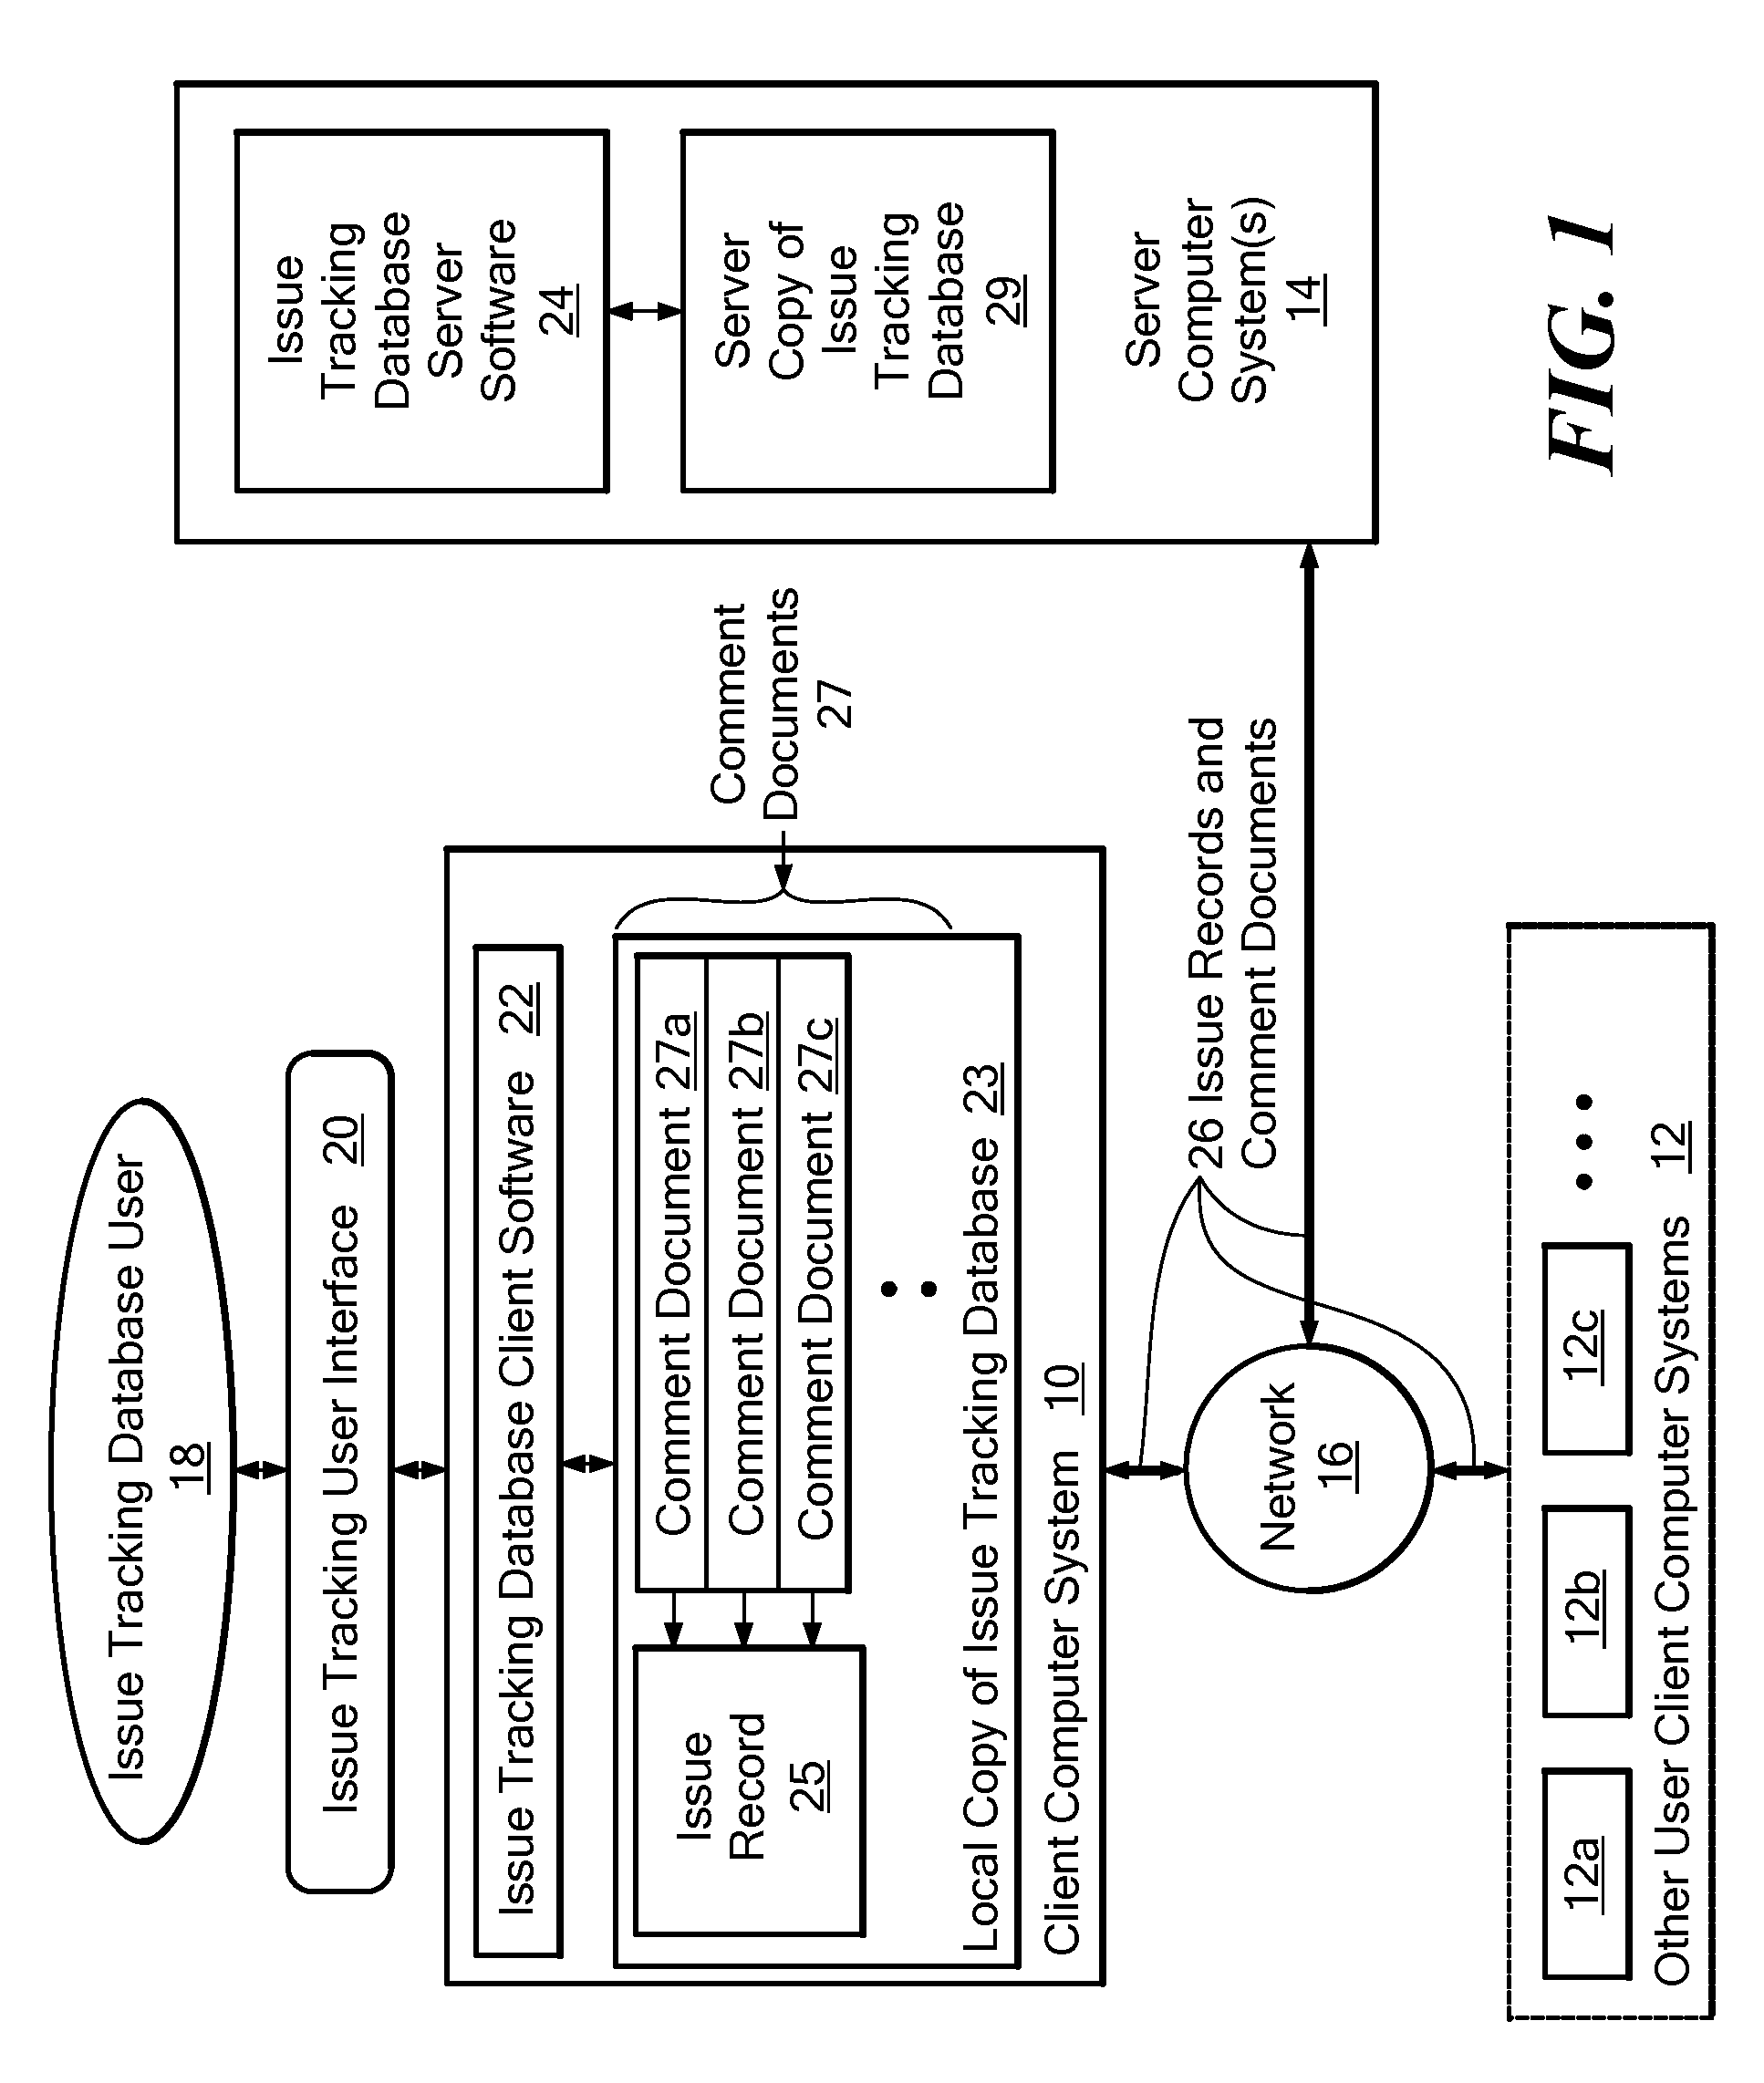 System and method for efficiently processing comments to records in a database, while avoiding replication/save conflicts